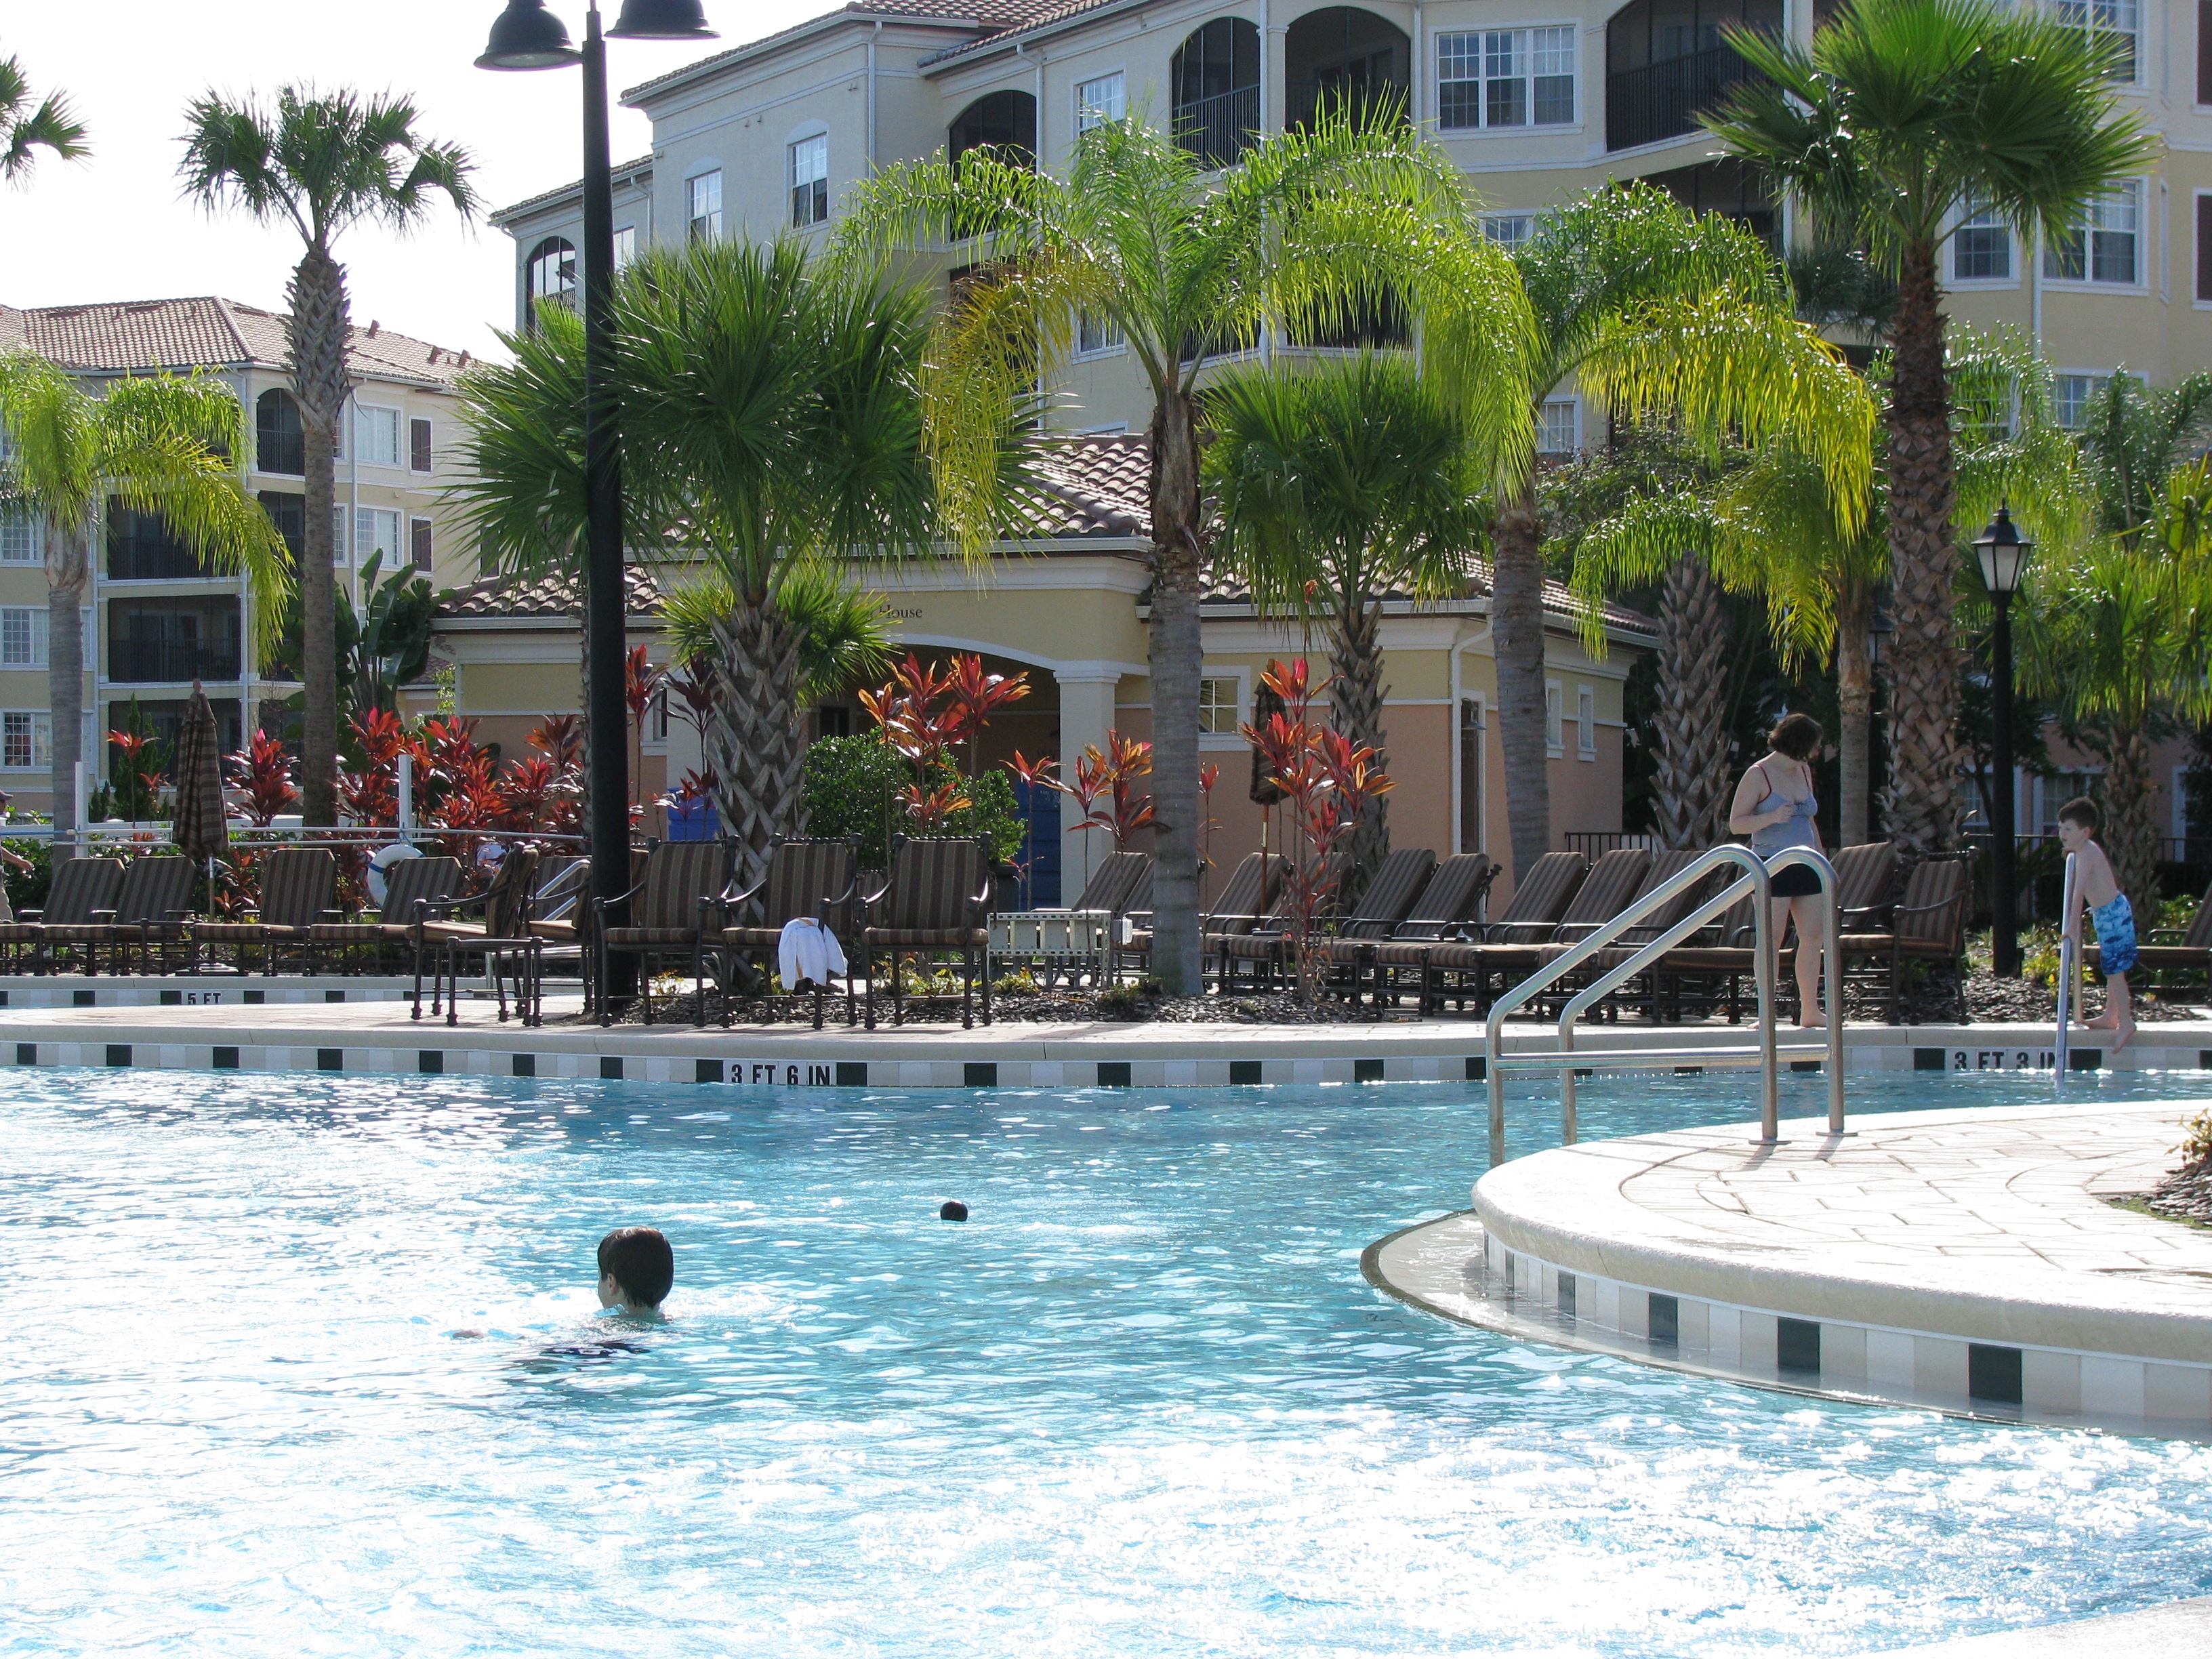 the pool at the World Quest Resort